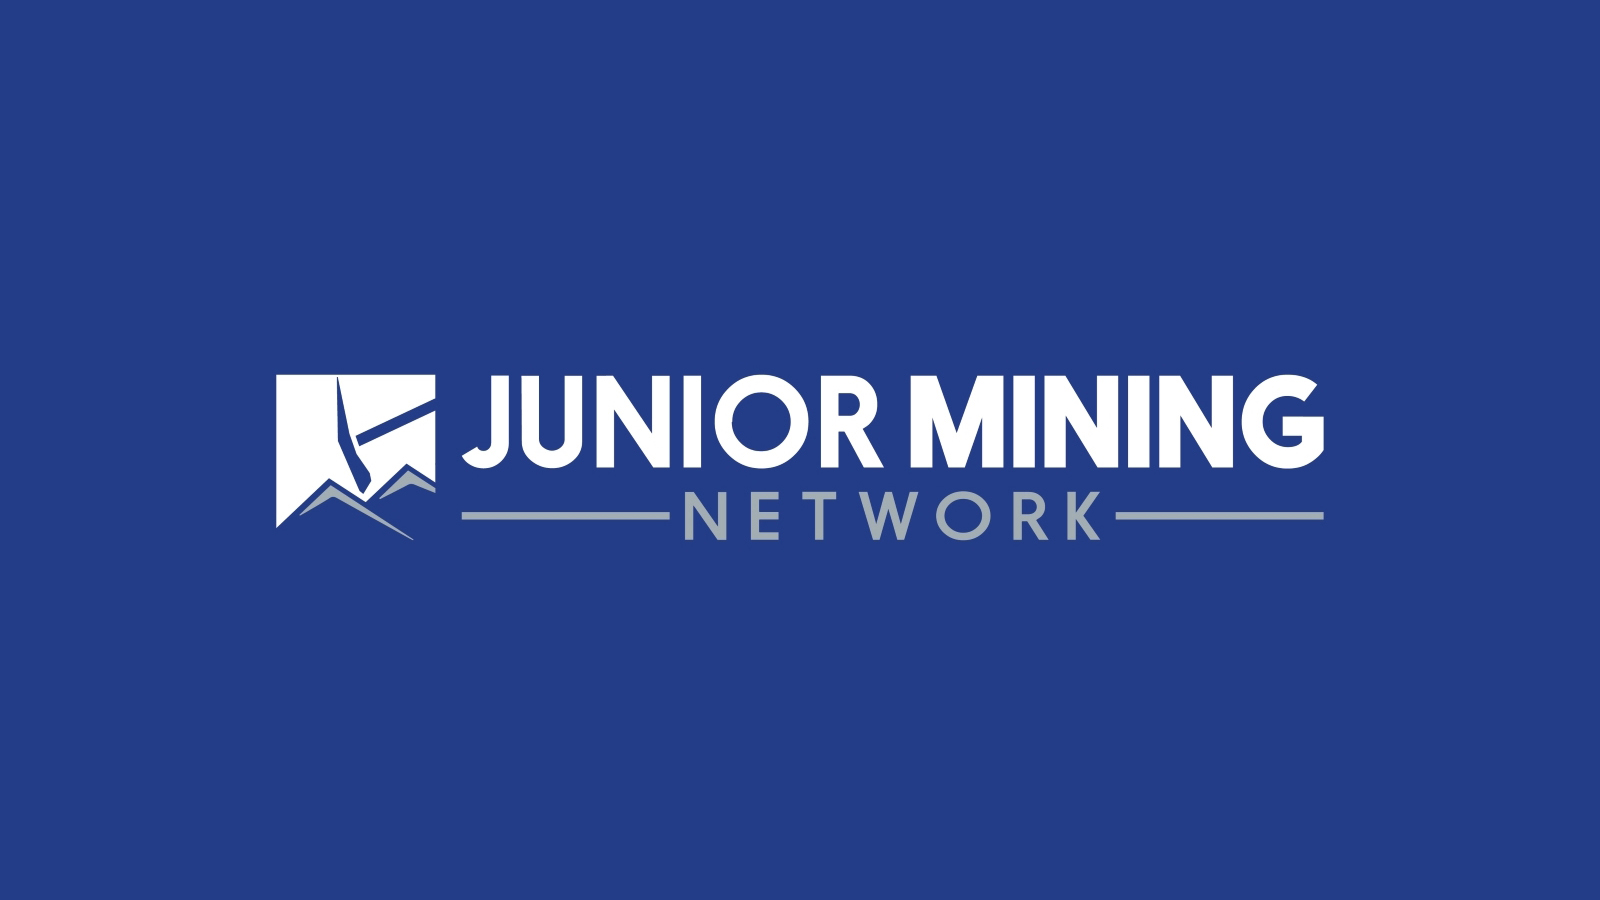 Denison Mines Announces Closing of US$86.3 Million Financing in Support of Strategic Acquisition of Physical Uranium